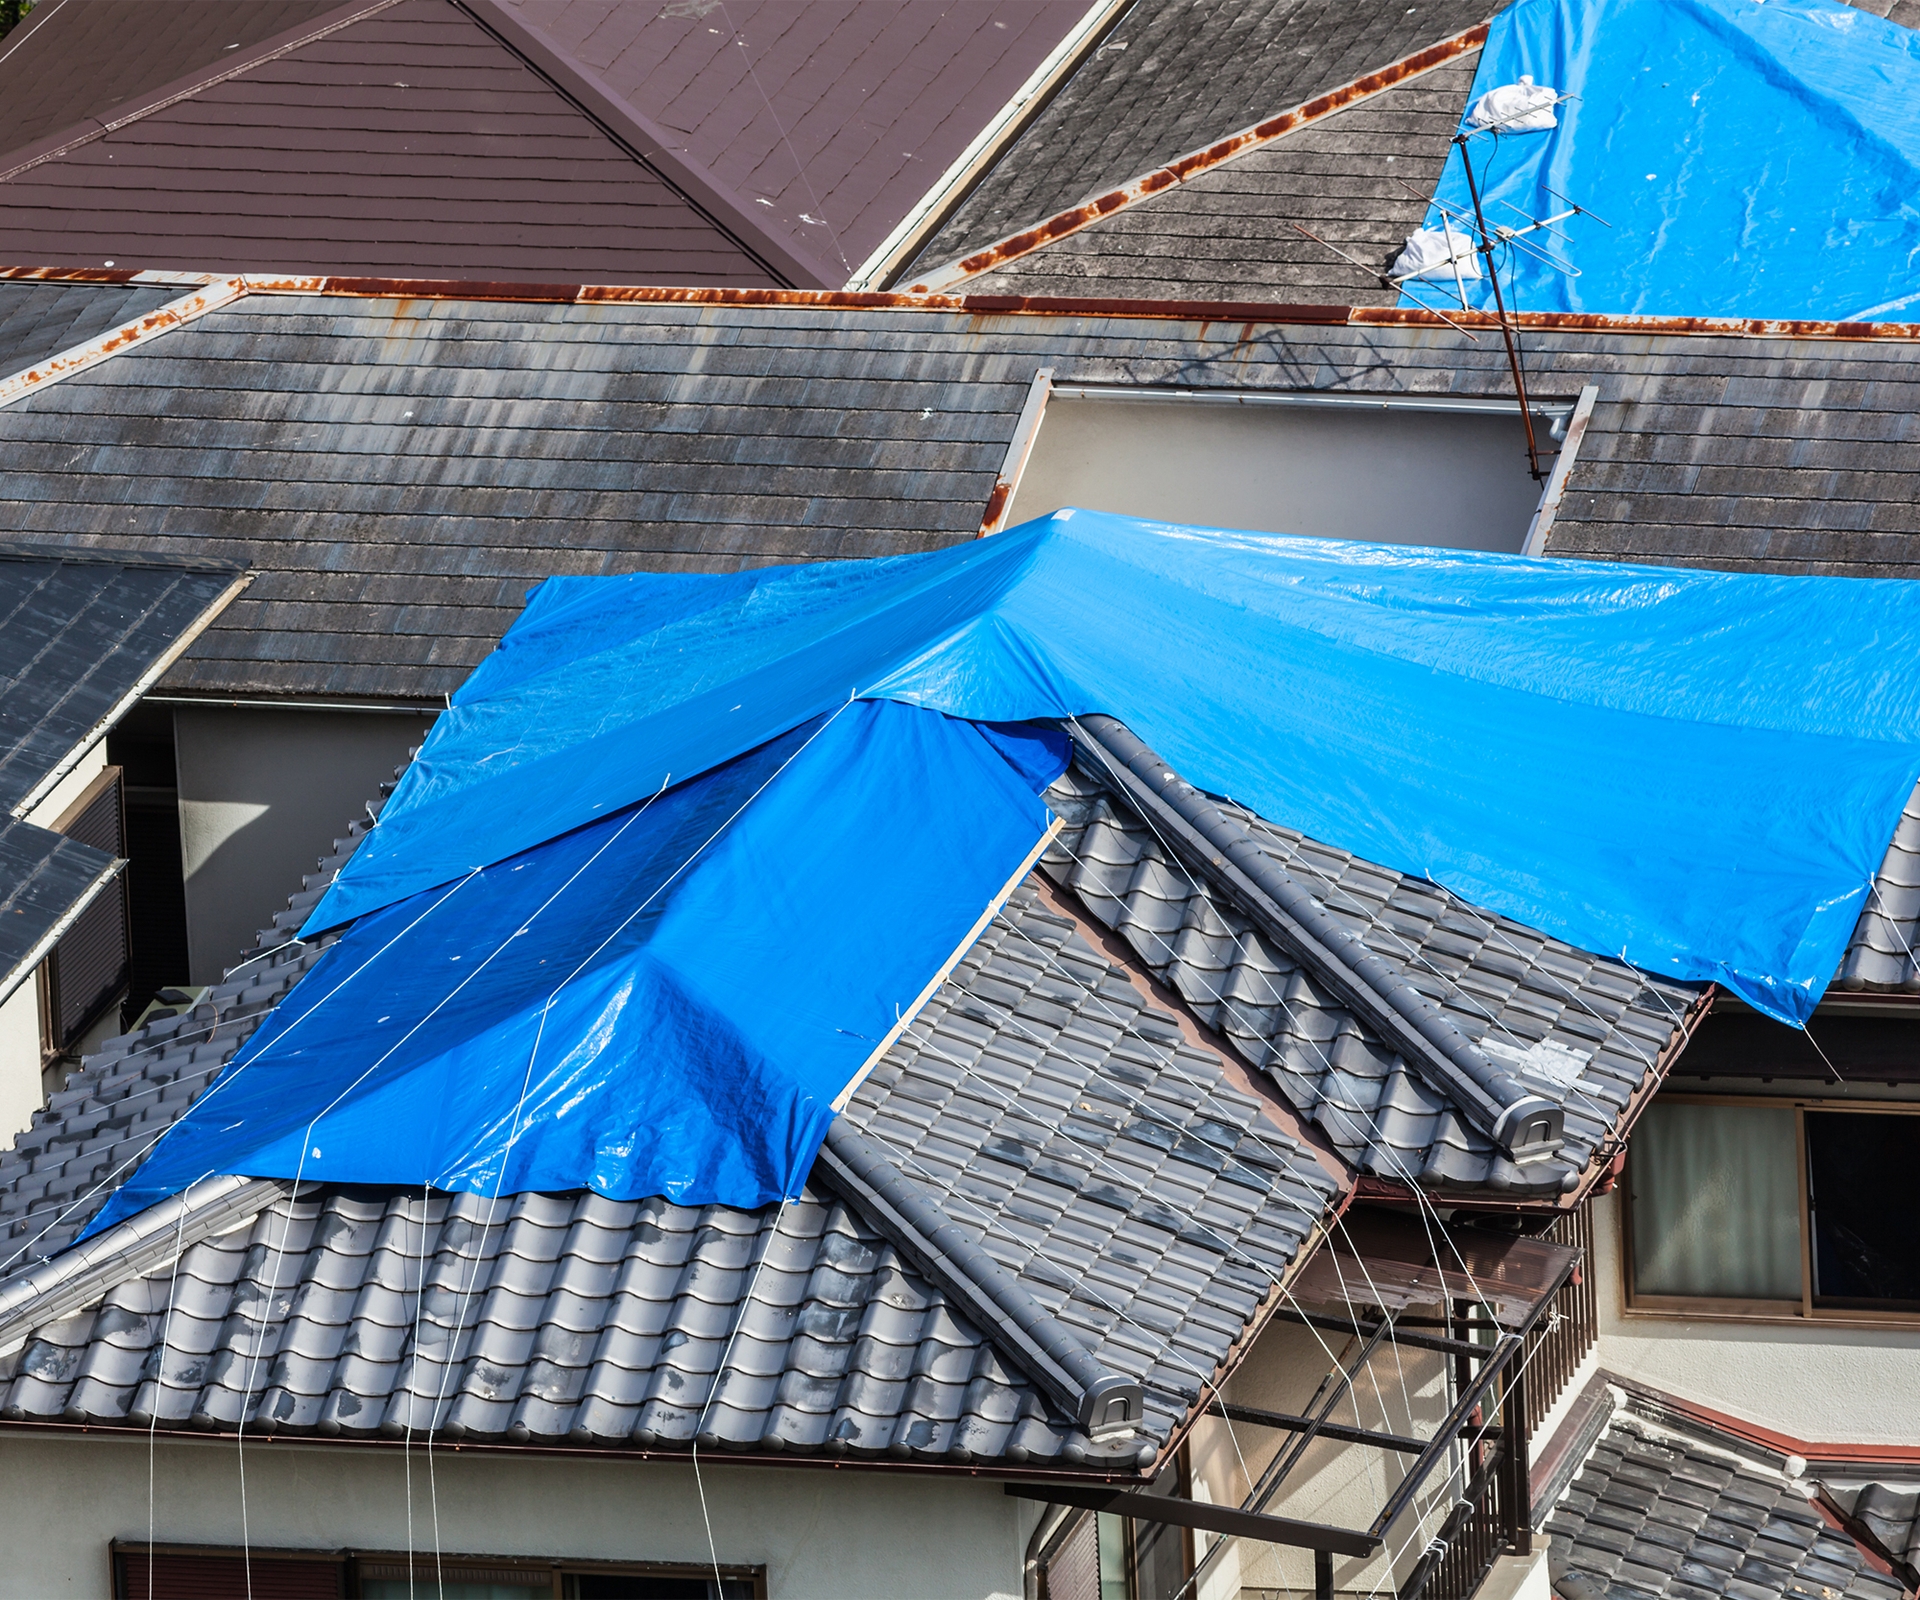 Aerial view of residential roof sections covered by blue tarps